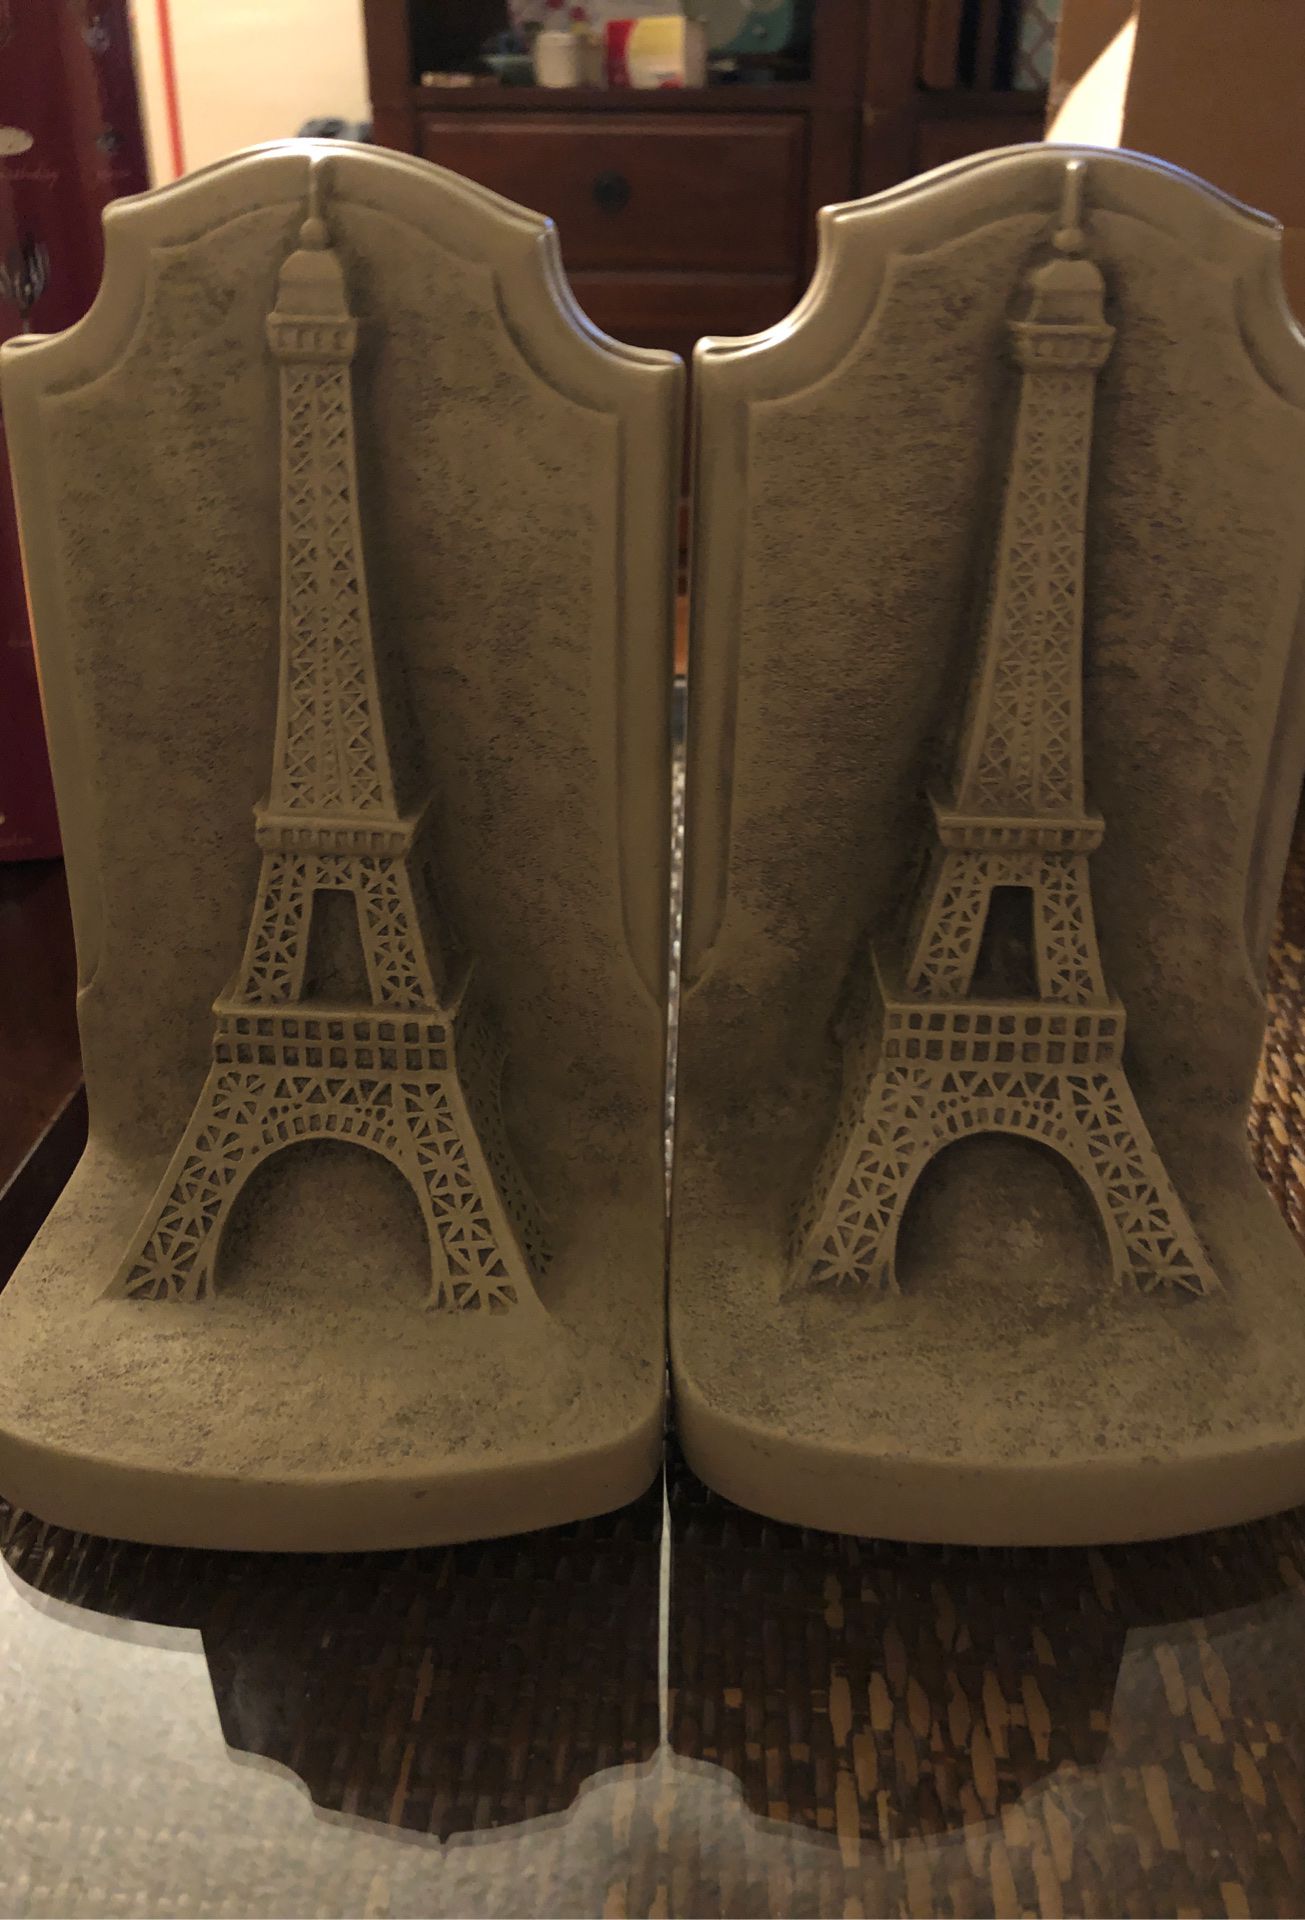 Eiffel Tower Bookends, Ceramic